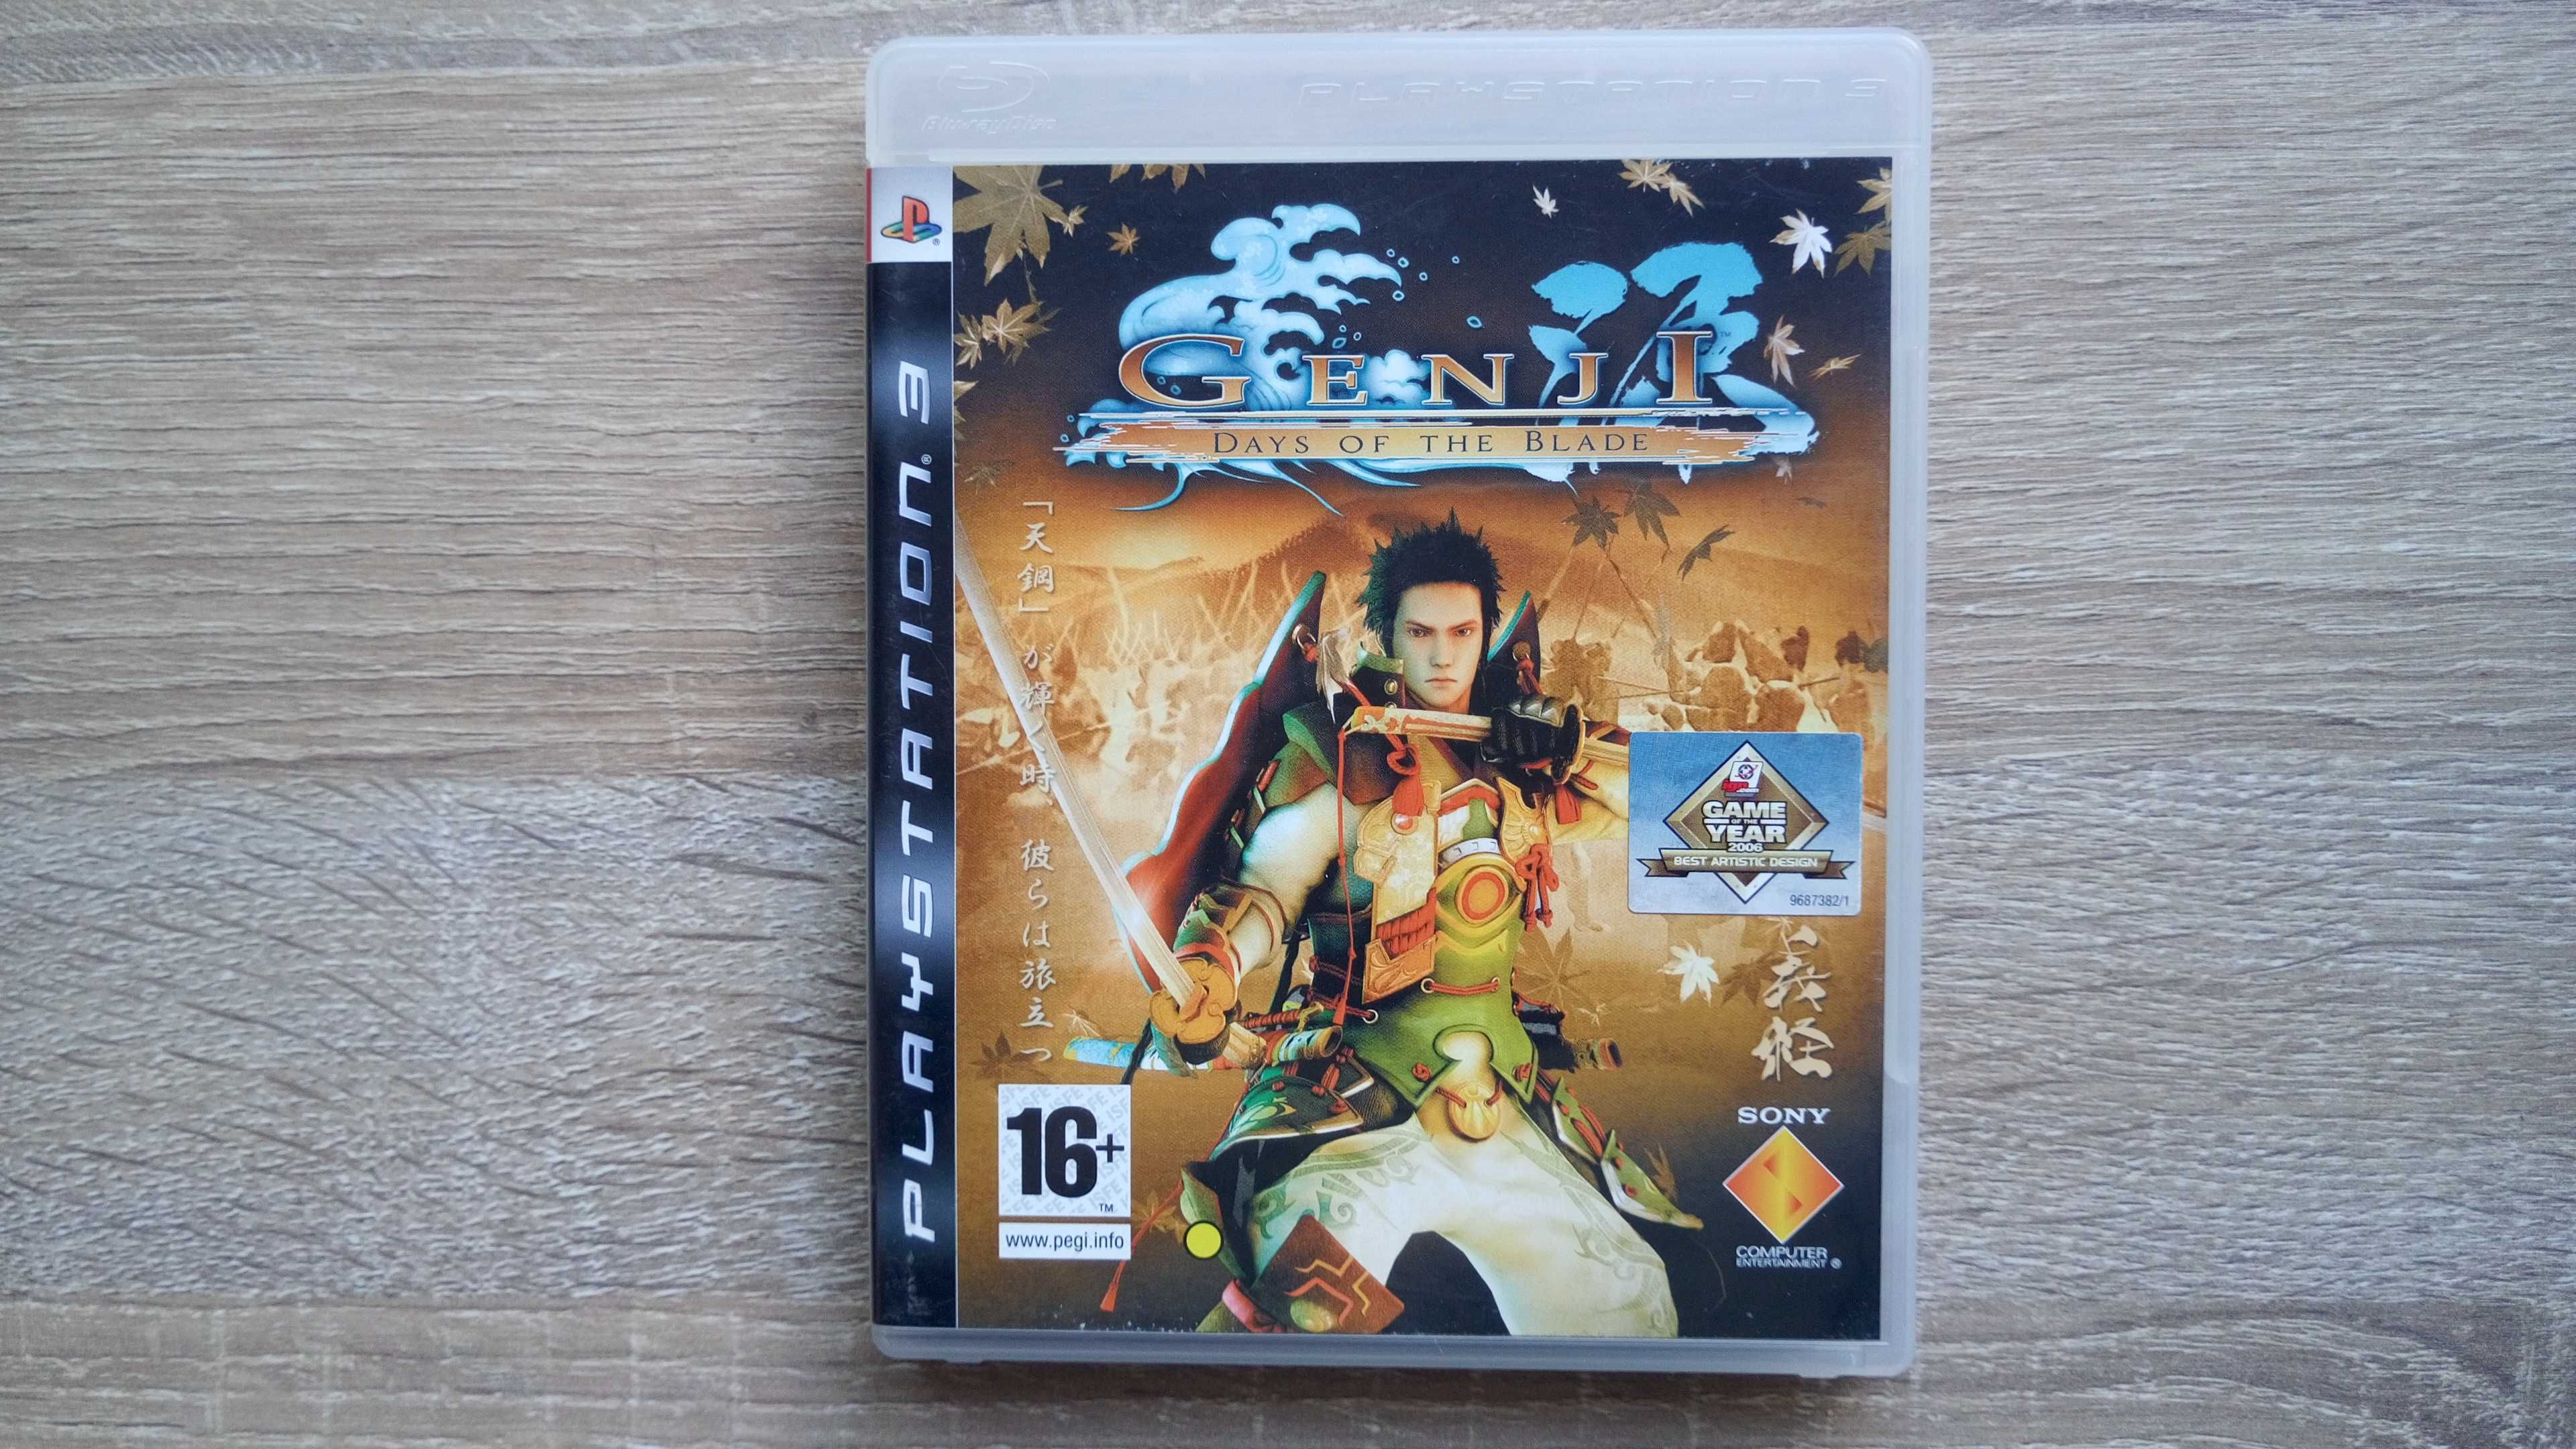 Vand Genji Days Of The Blade PS3 Play Station 3